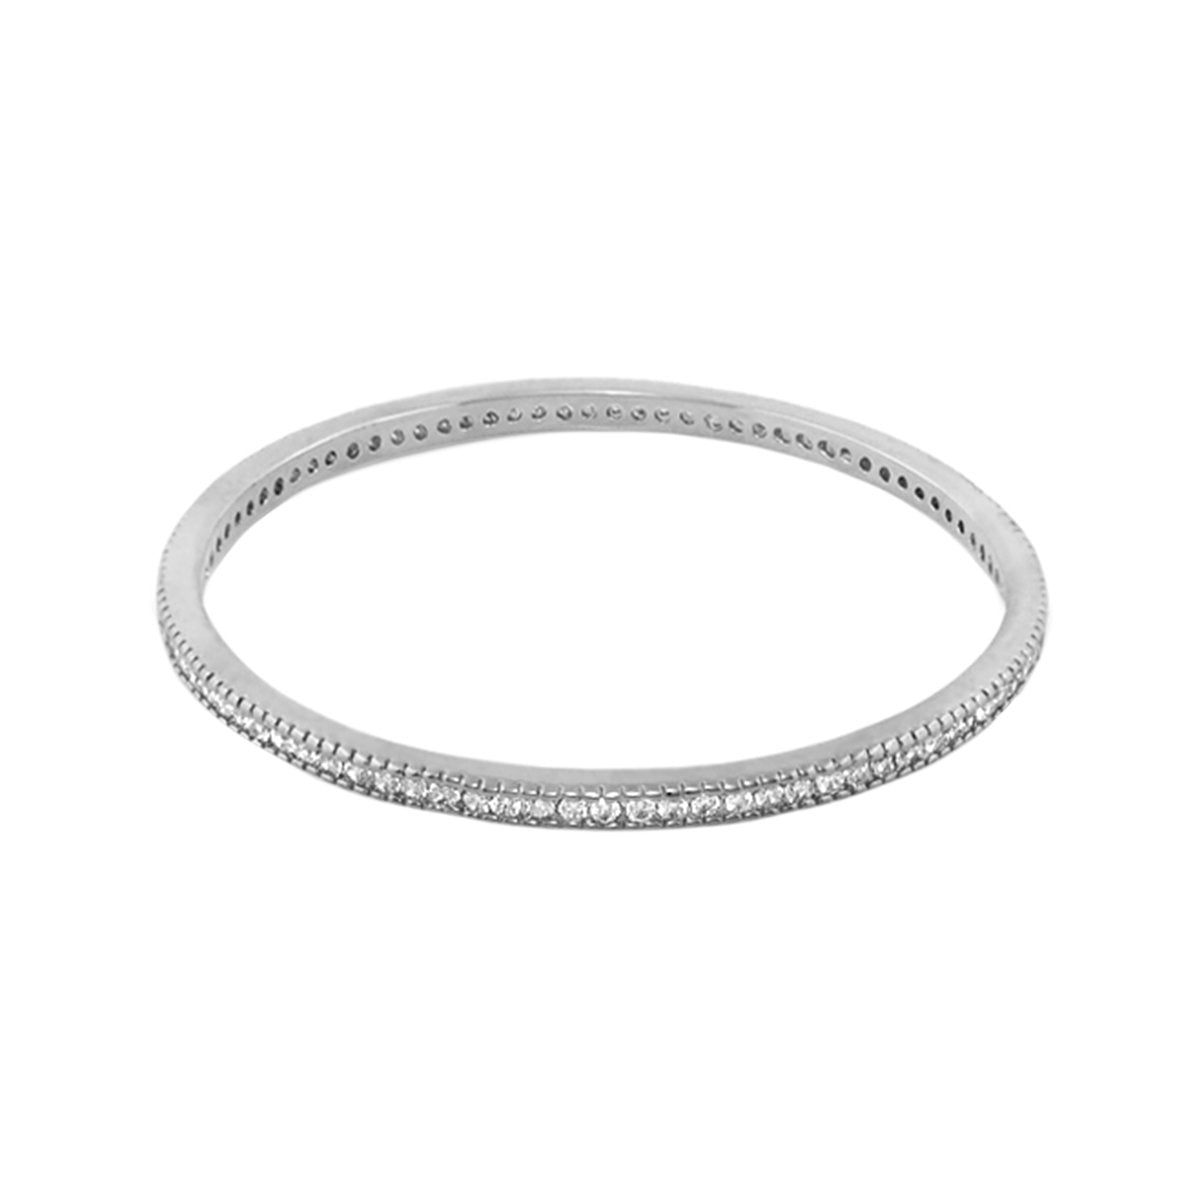 Child's Stackable Bangle